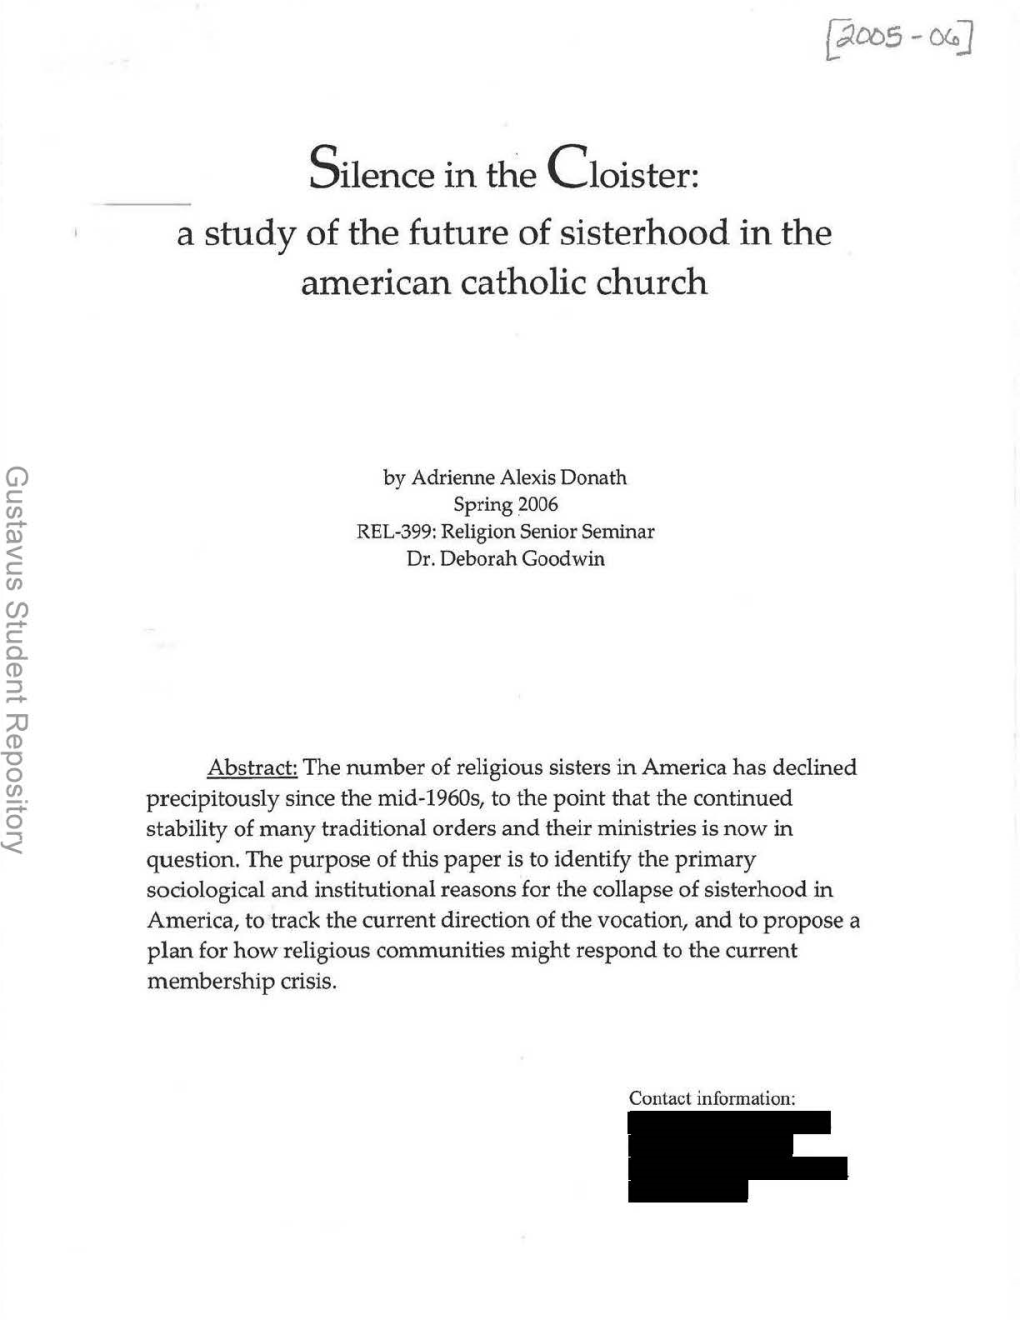 Silence in the Cloister: a Study of the Future of Sisterhood in the American Catholic Church